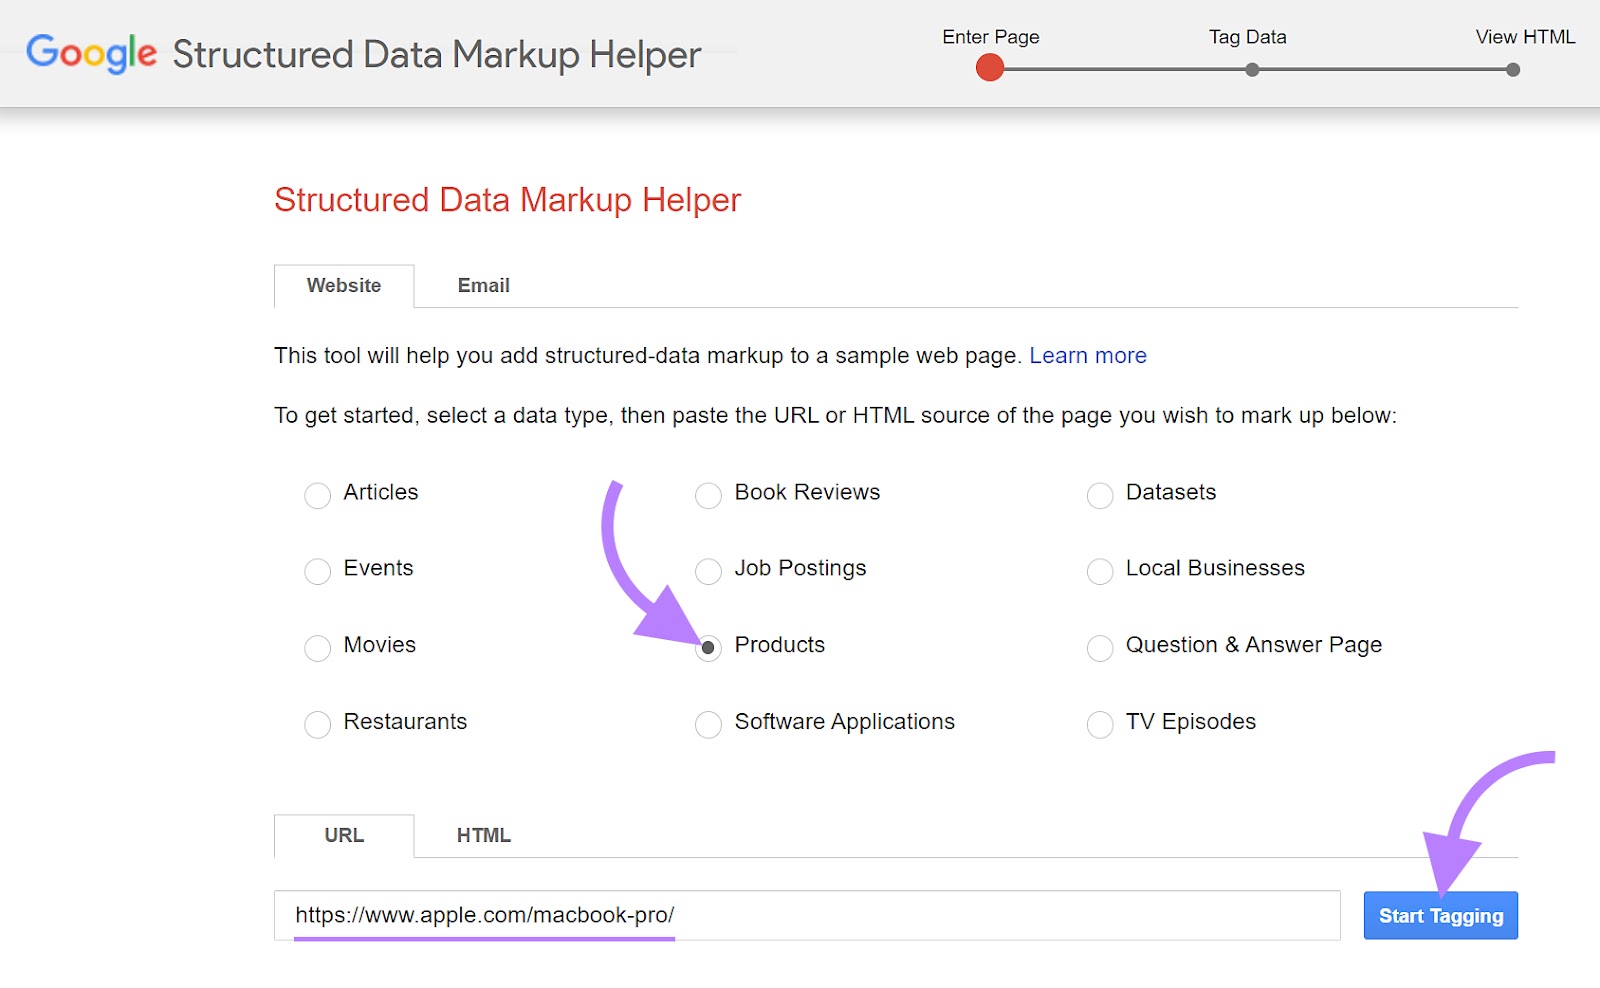 Google Structured Data Markup Helper with the “Products” option selected and the Apple Macbook Pro URL in the search bar.